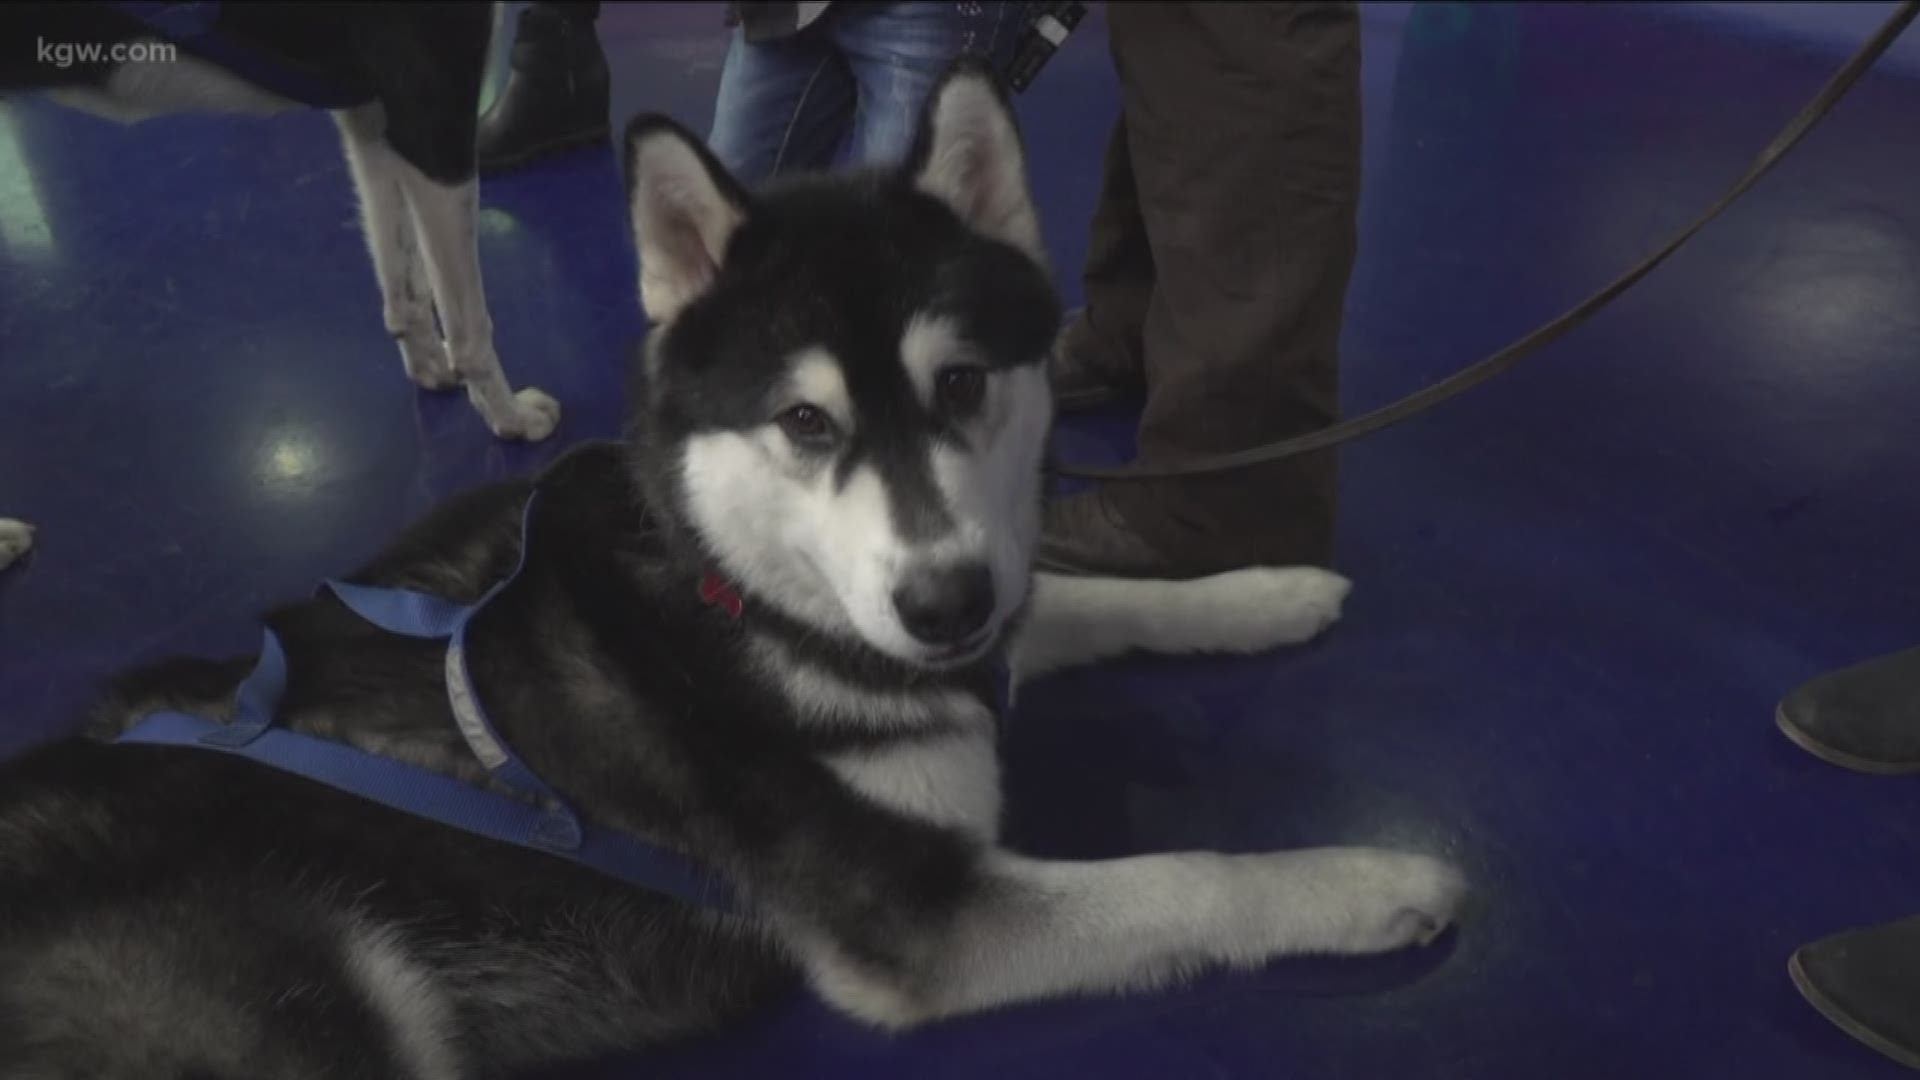 This year, Snowvana will feature sled dog rides on an 80' long track.
snowvana.com
#TonightwithCassidy